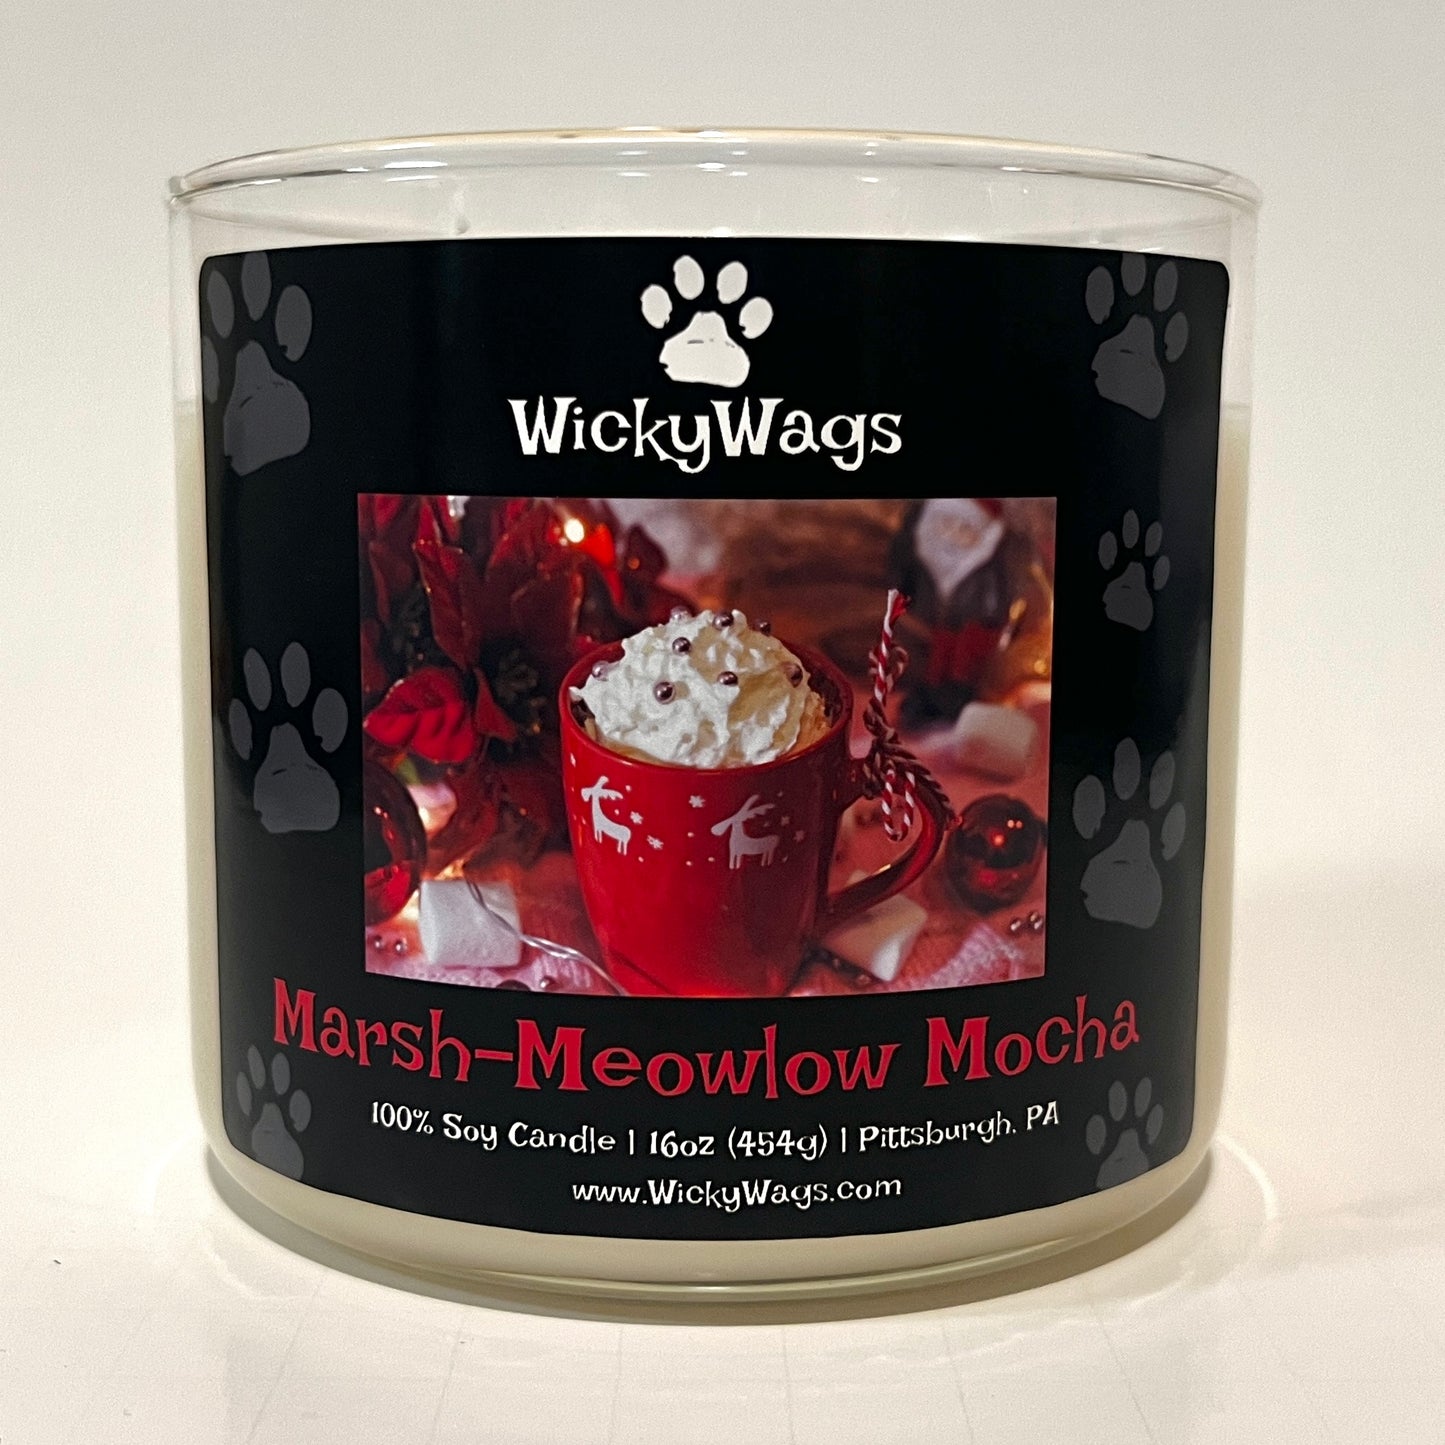 Holiday scented candle called Marsh-Meowlow Mocha.